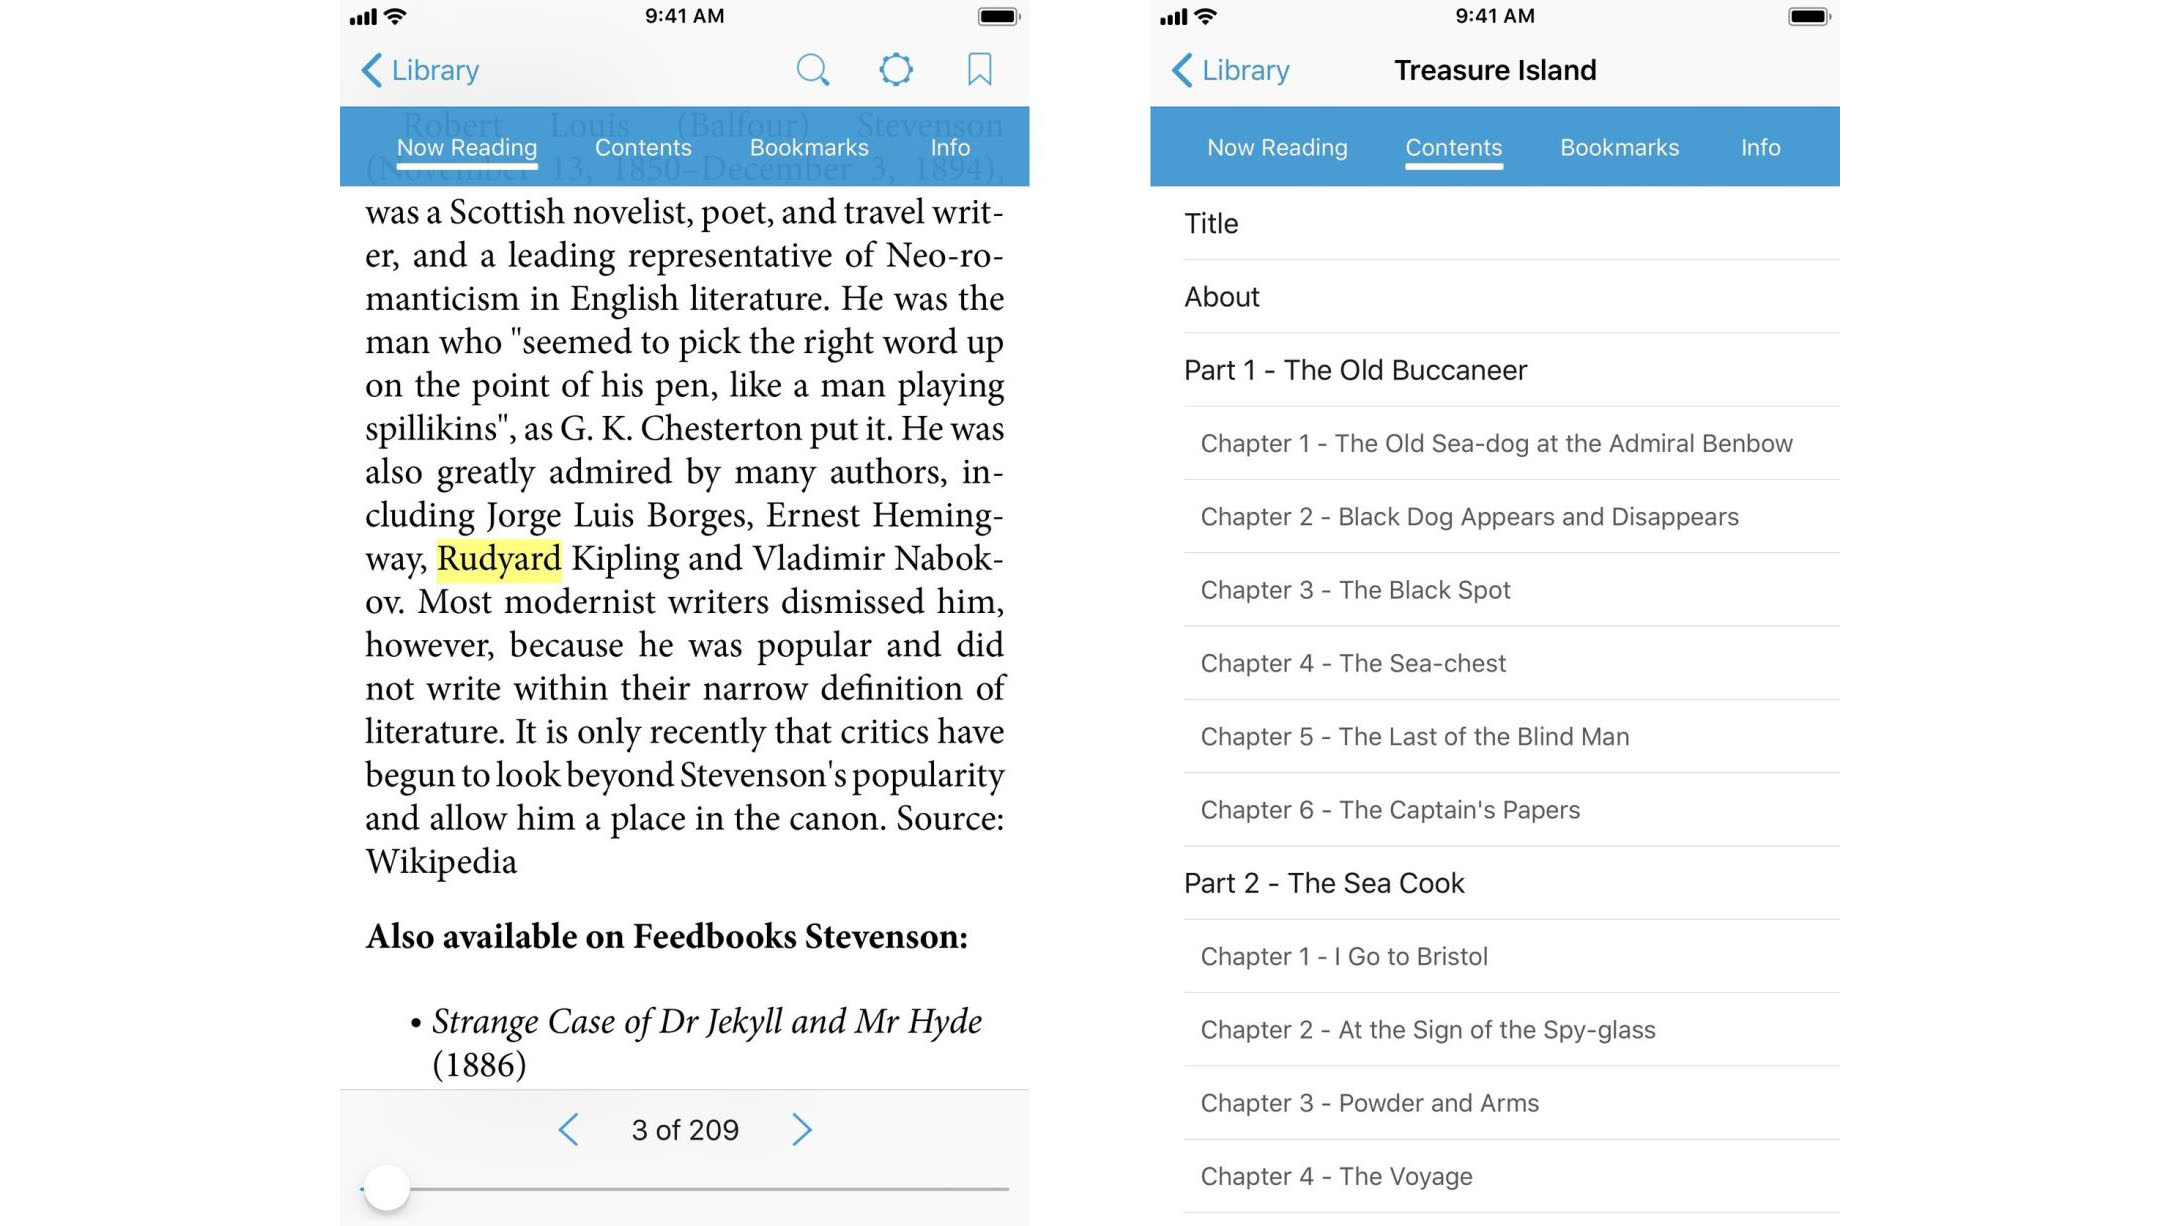 A screengrab of the Bluefire Reader app